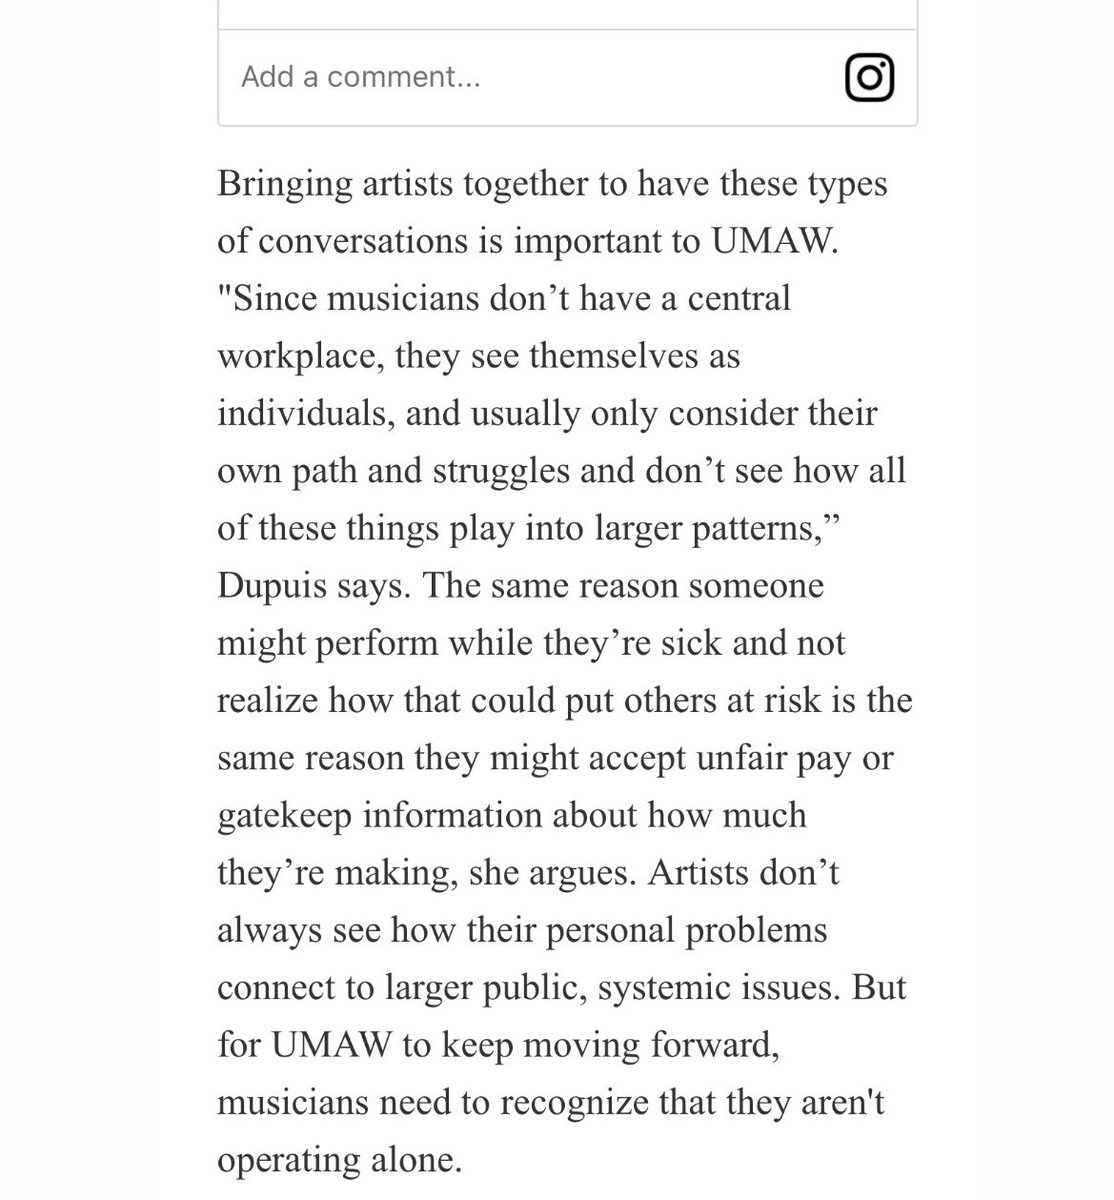 Musicians, like all workers, deserve fair pay and fair working conditions. To get involved with UMAW, become a member! We need you! The only way to change the music industry is through solidarity and collective action 💪 Read the full article by Kristin Canning on @marieclaire